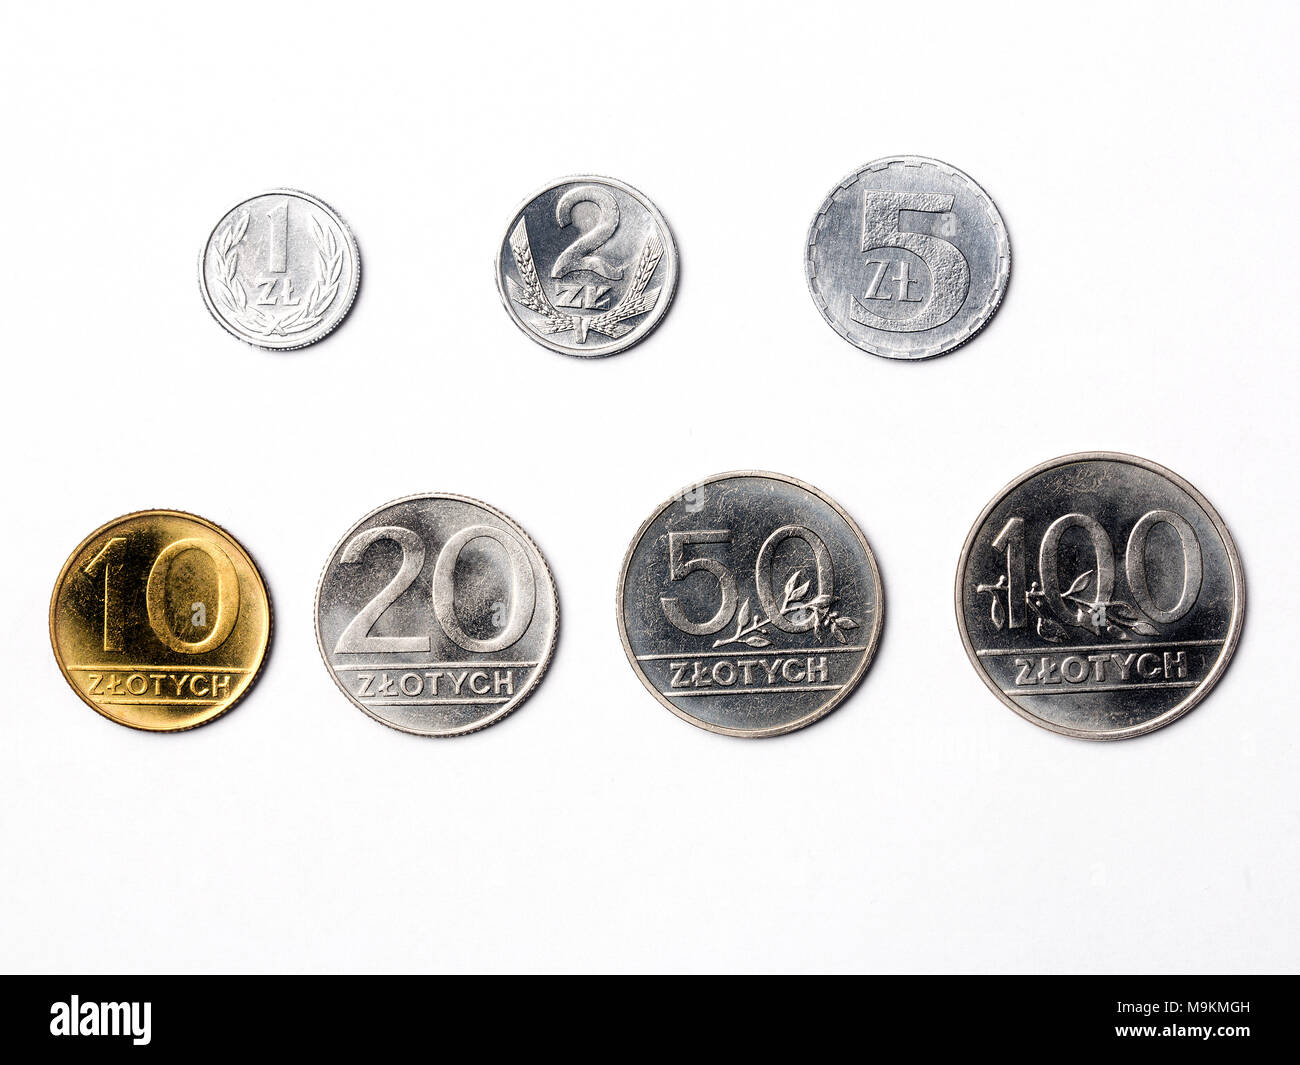 Old Polish coins on a white background Stock Photo